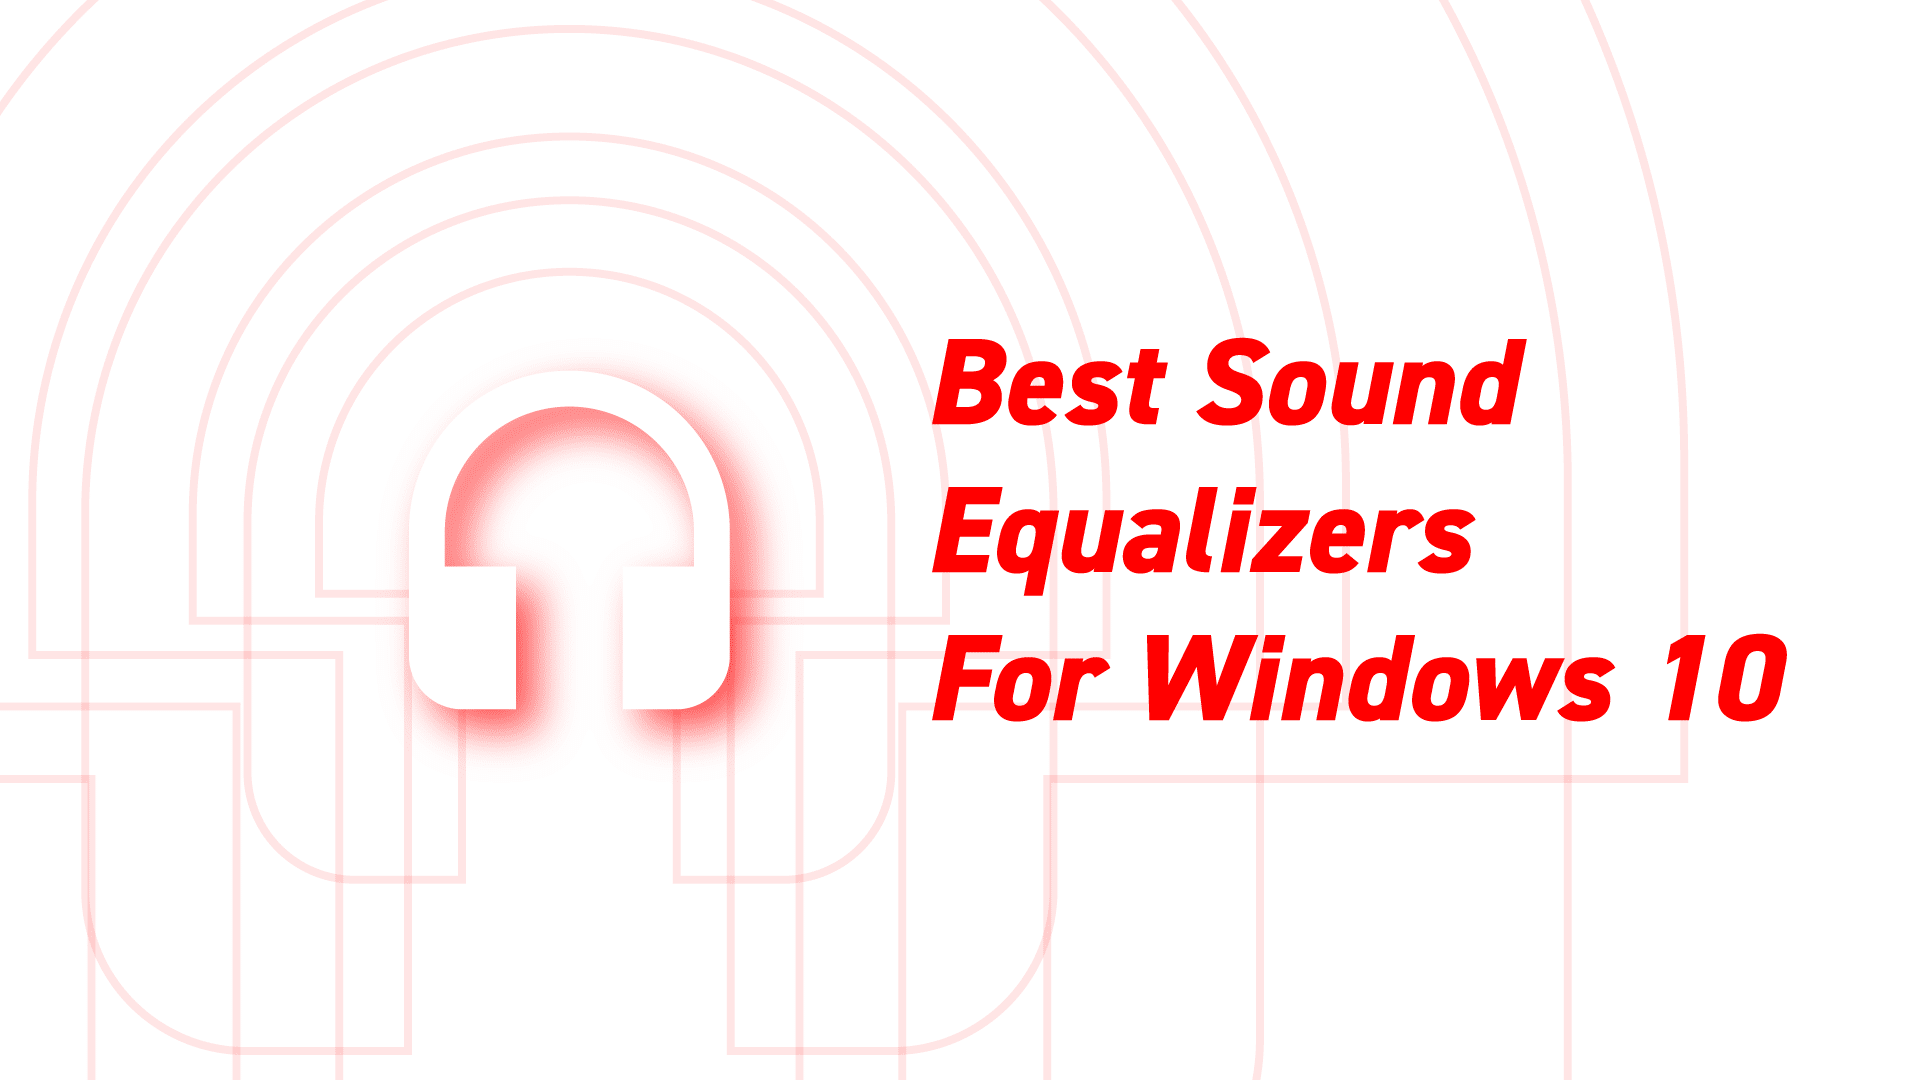 Best Sound Equalizers for Windows 10